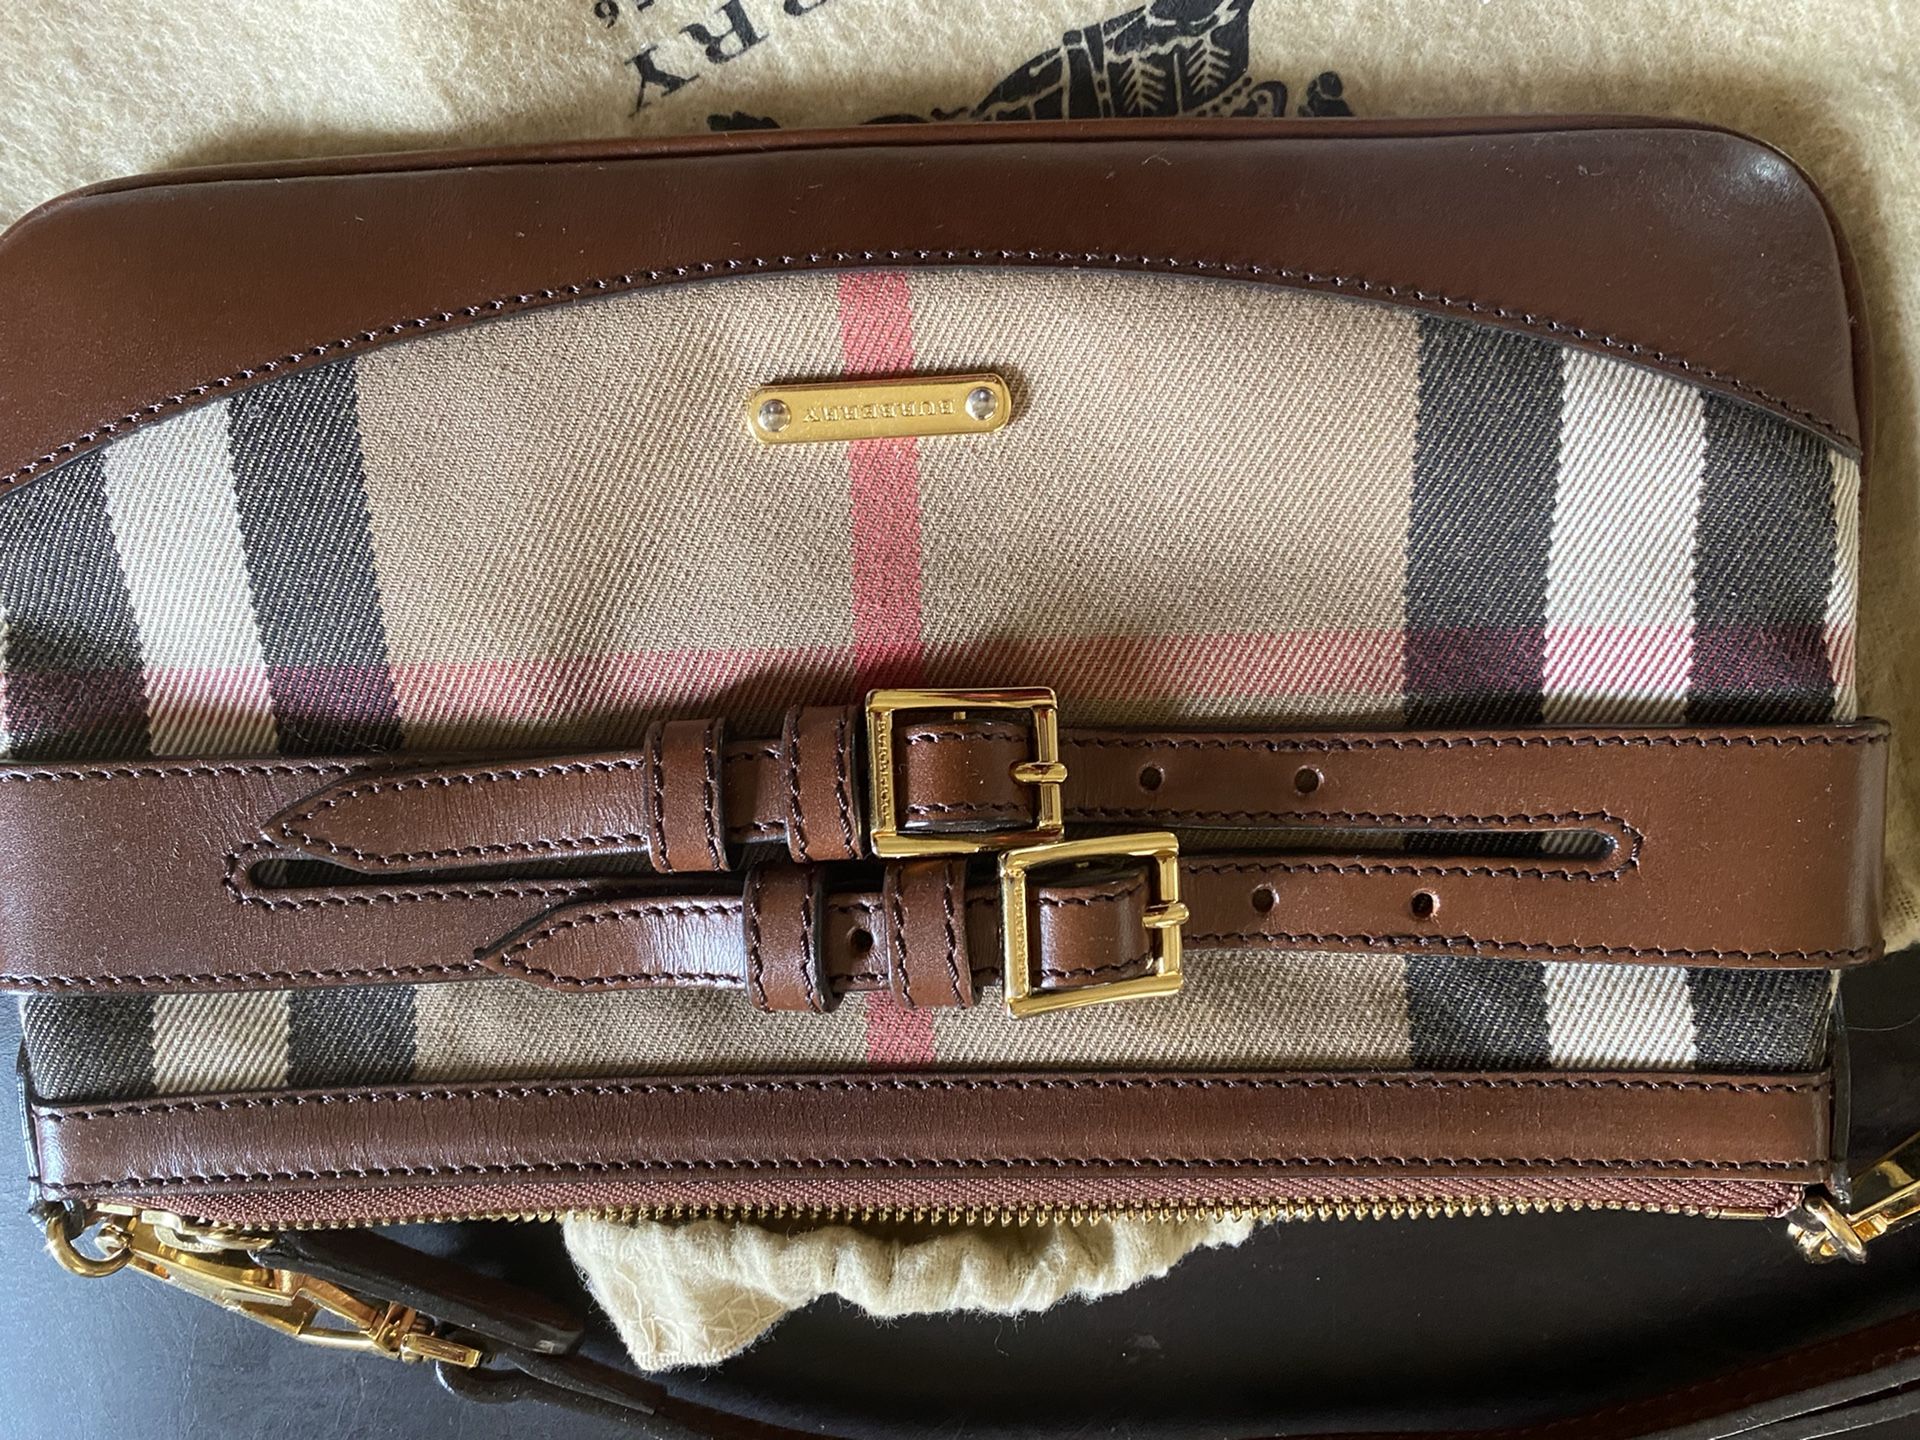 Burberry Bridle Bag Italy, SAVE 36% 